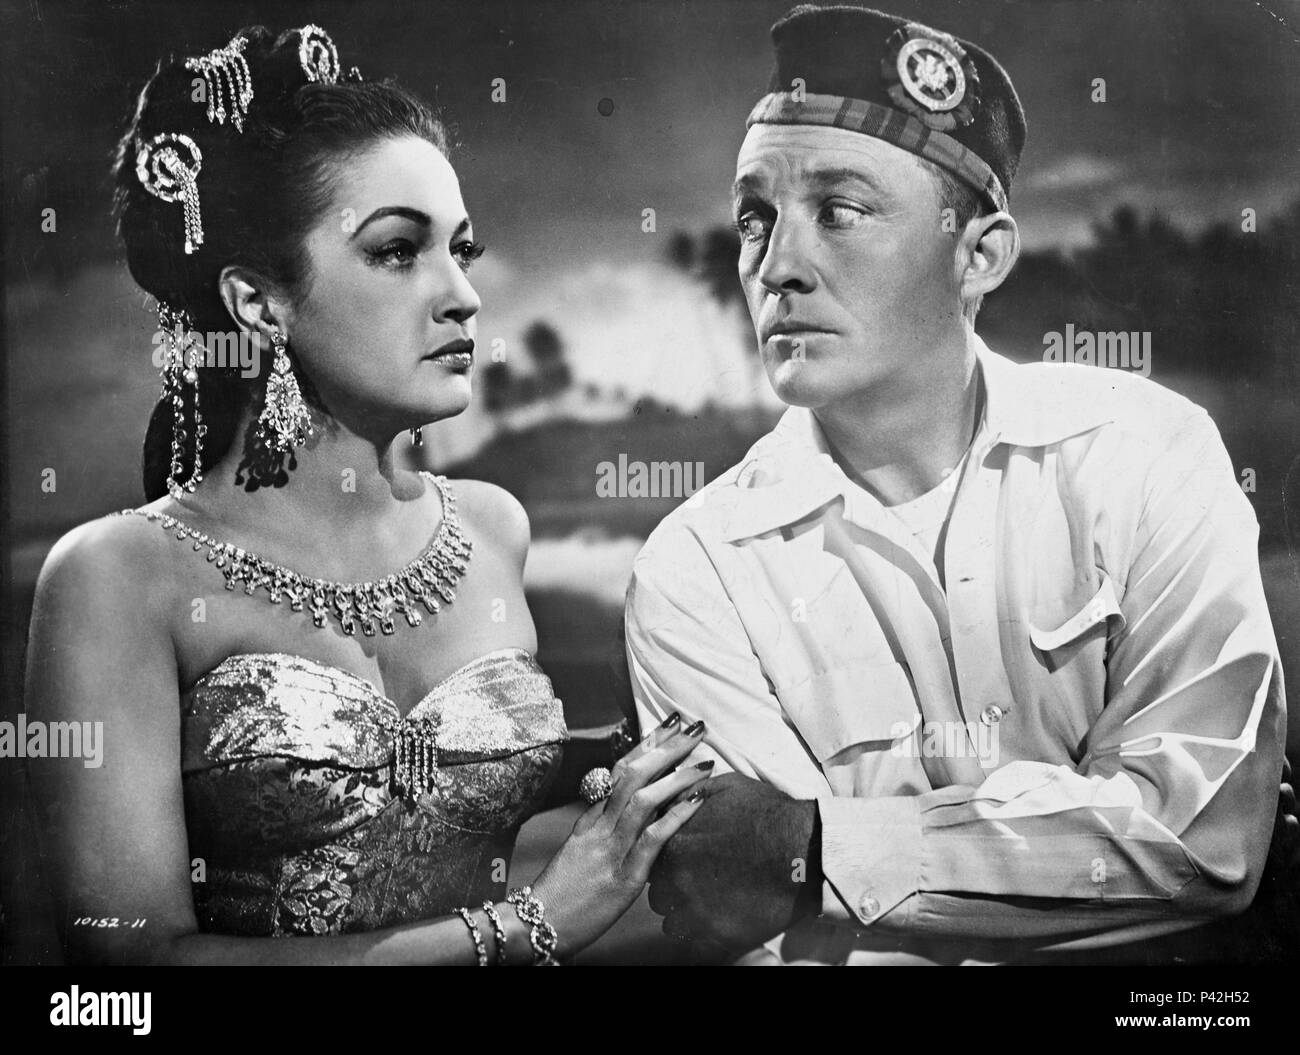 Original Film Title: ROAD TO BALI.  English Title: ROAD TO BALI.  Film Director: HAL WALKER.  Year: 1952.  Stars: BING CROSBY; DOROTHY LAMOUR. Credit: PARAMOUNT PICTURES / Album Stock Photo